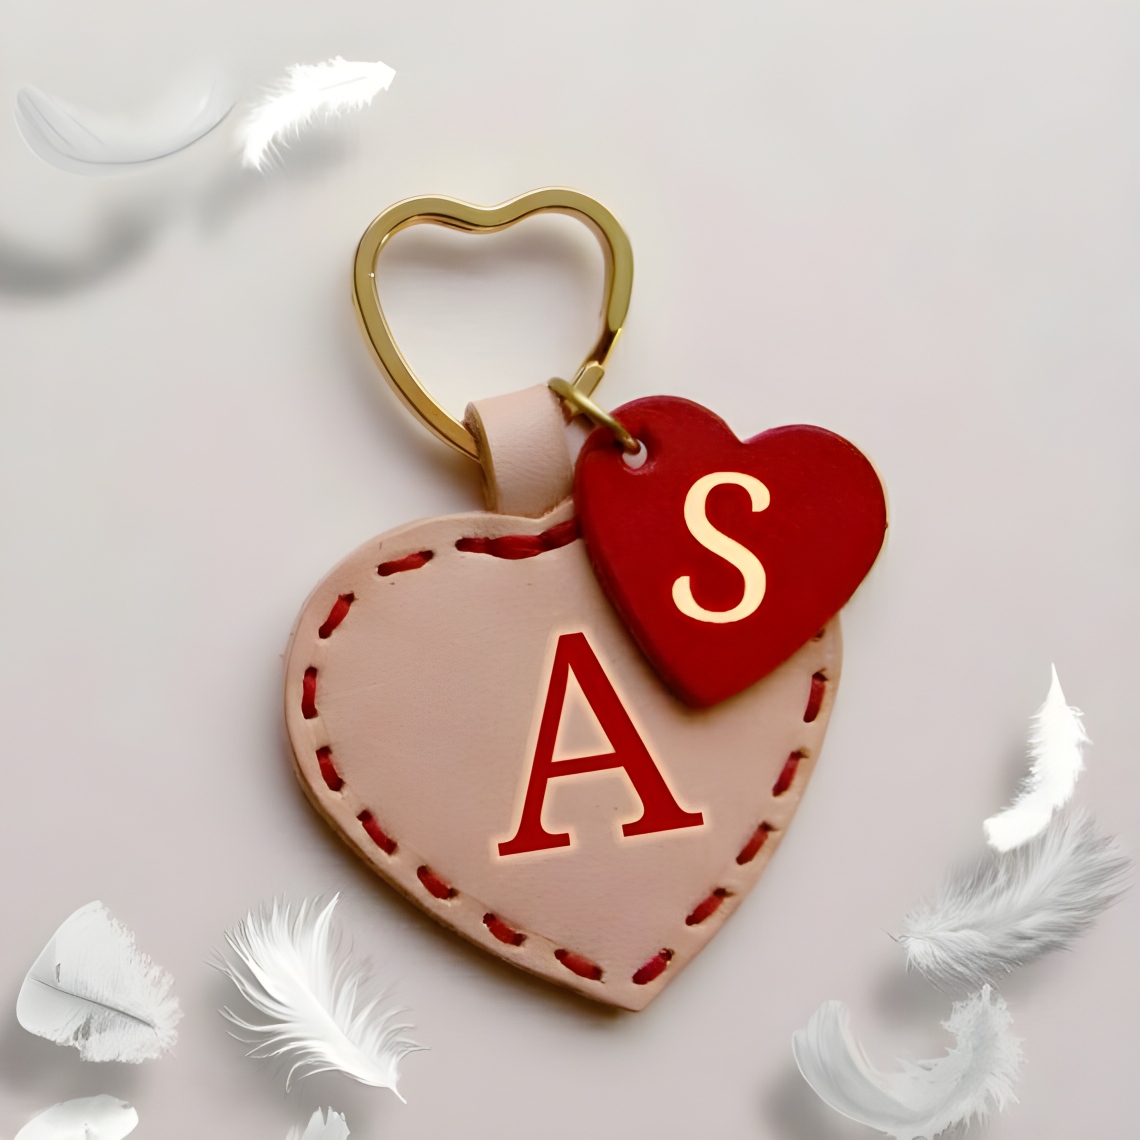 As Name-a s love keychain